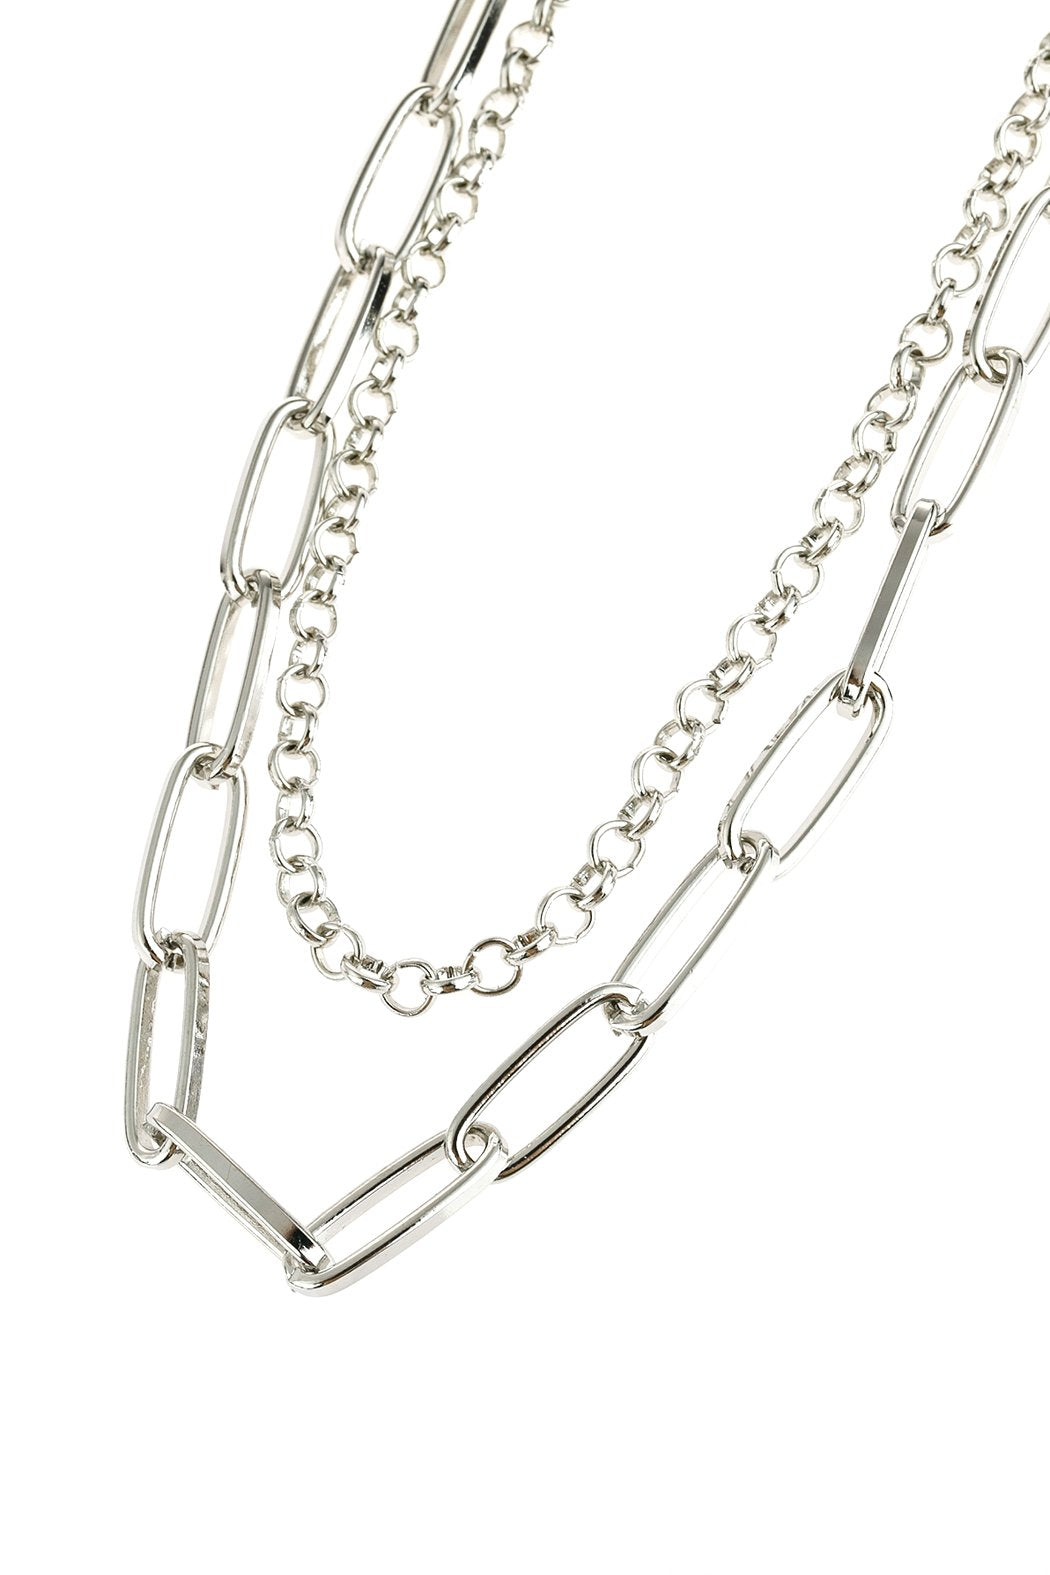 Hdn2973 - Multiline Chain Necklace - LOLA LUXE